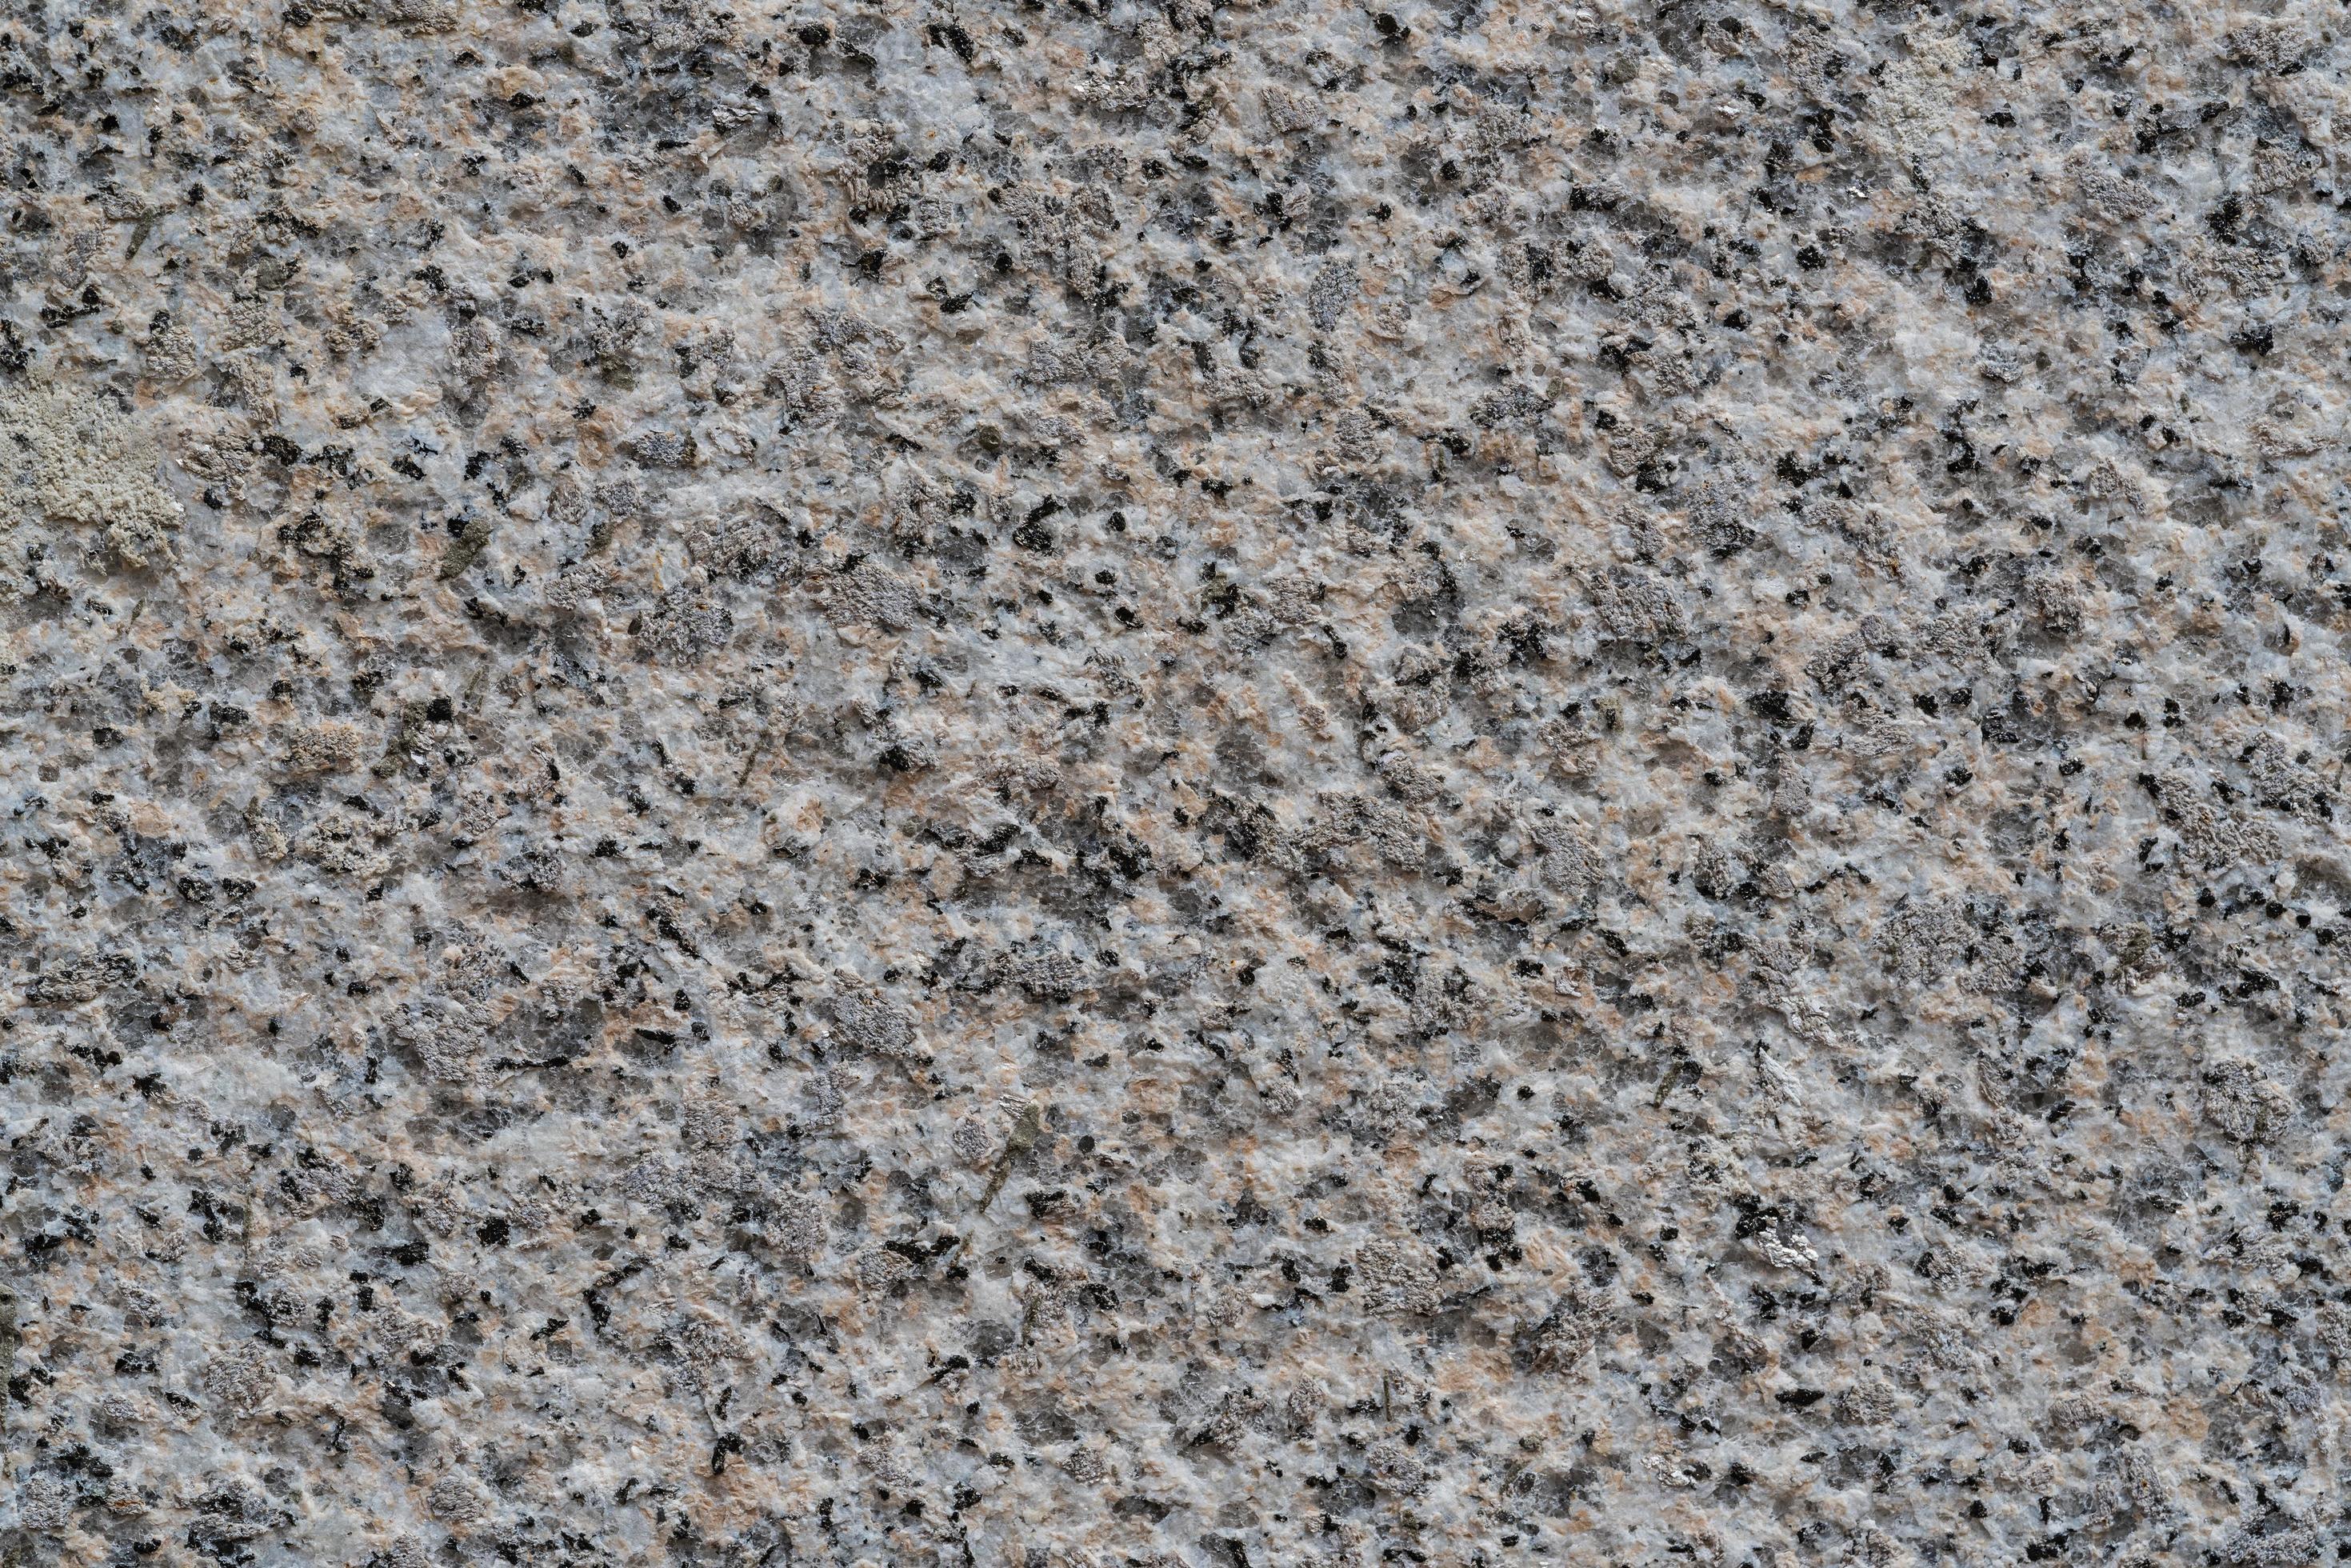 Texture of a granite stone surface photo